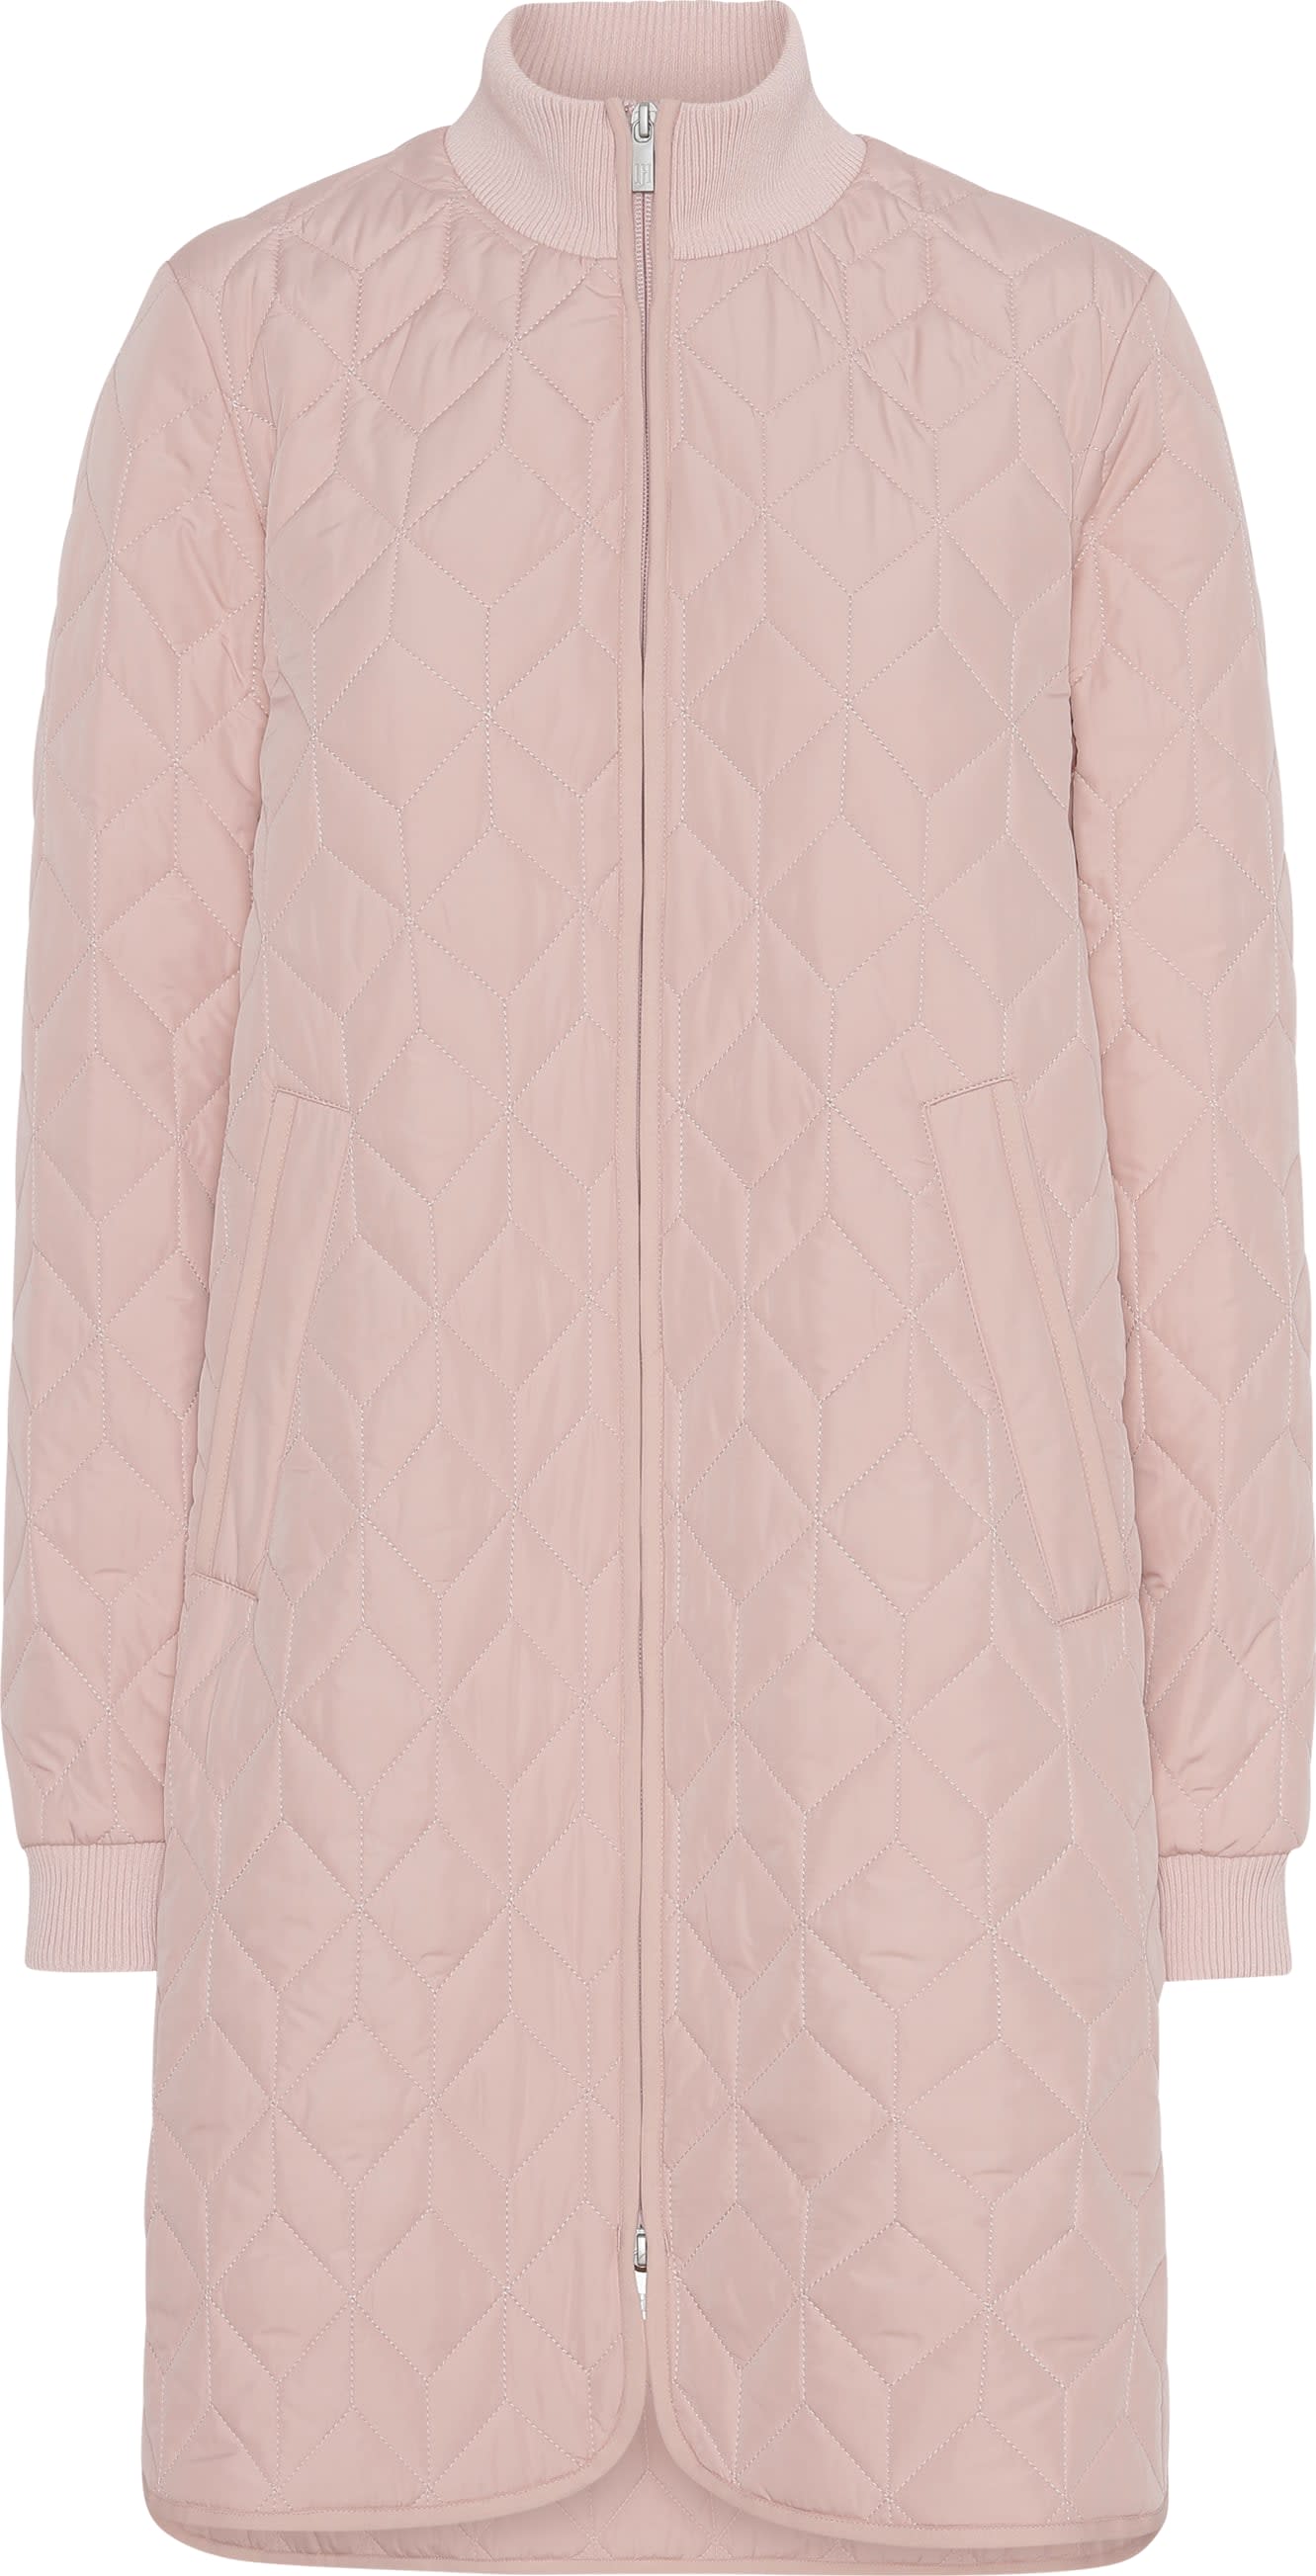 Women's Padded Quilt Coat Pale Pink